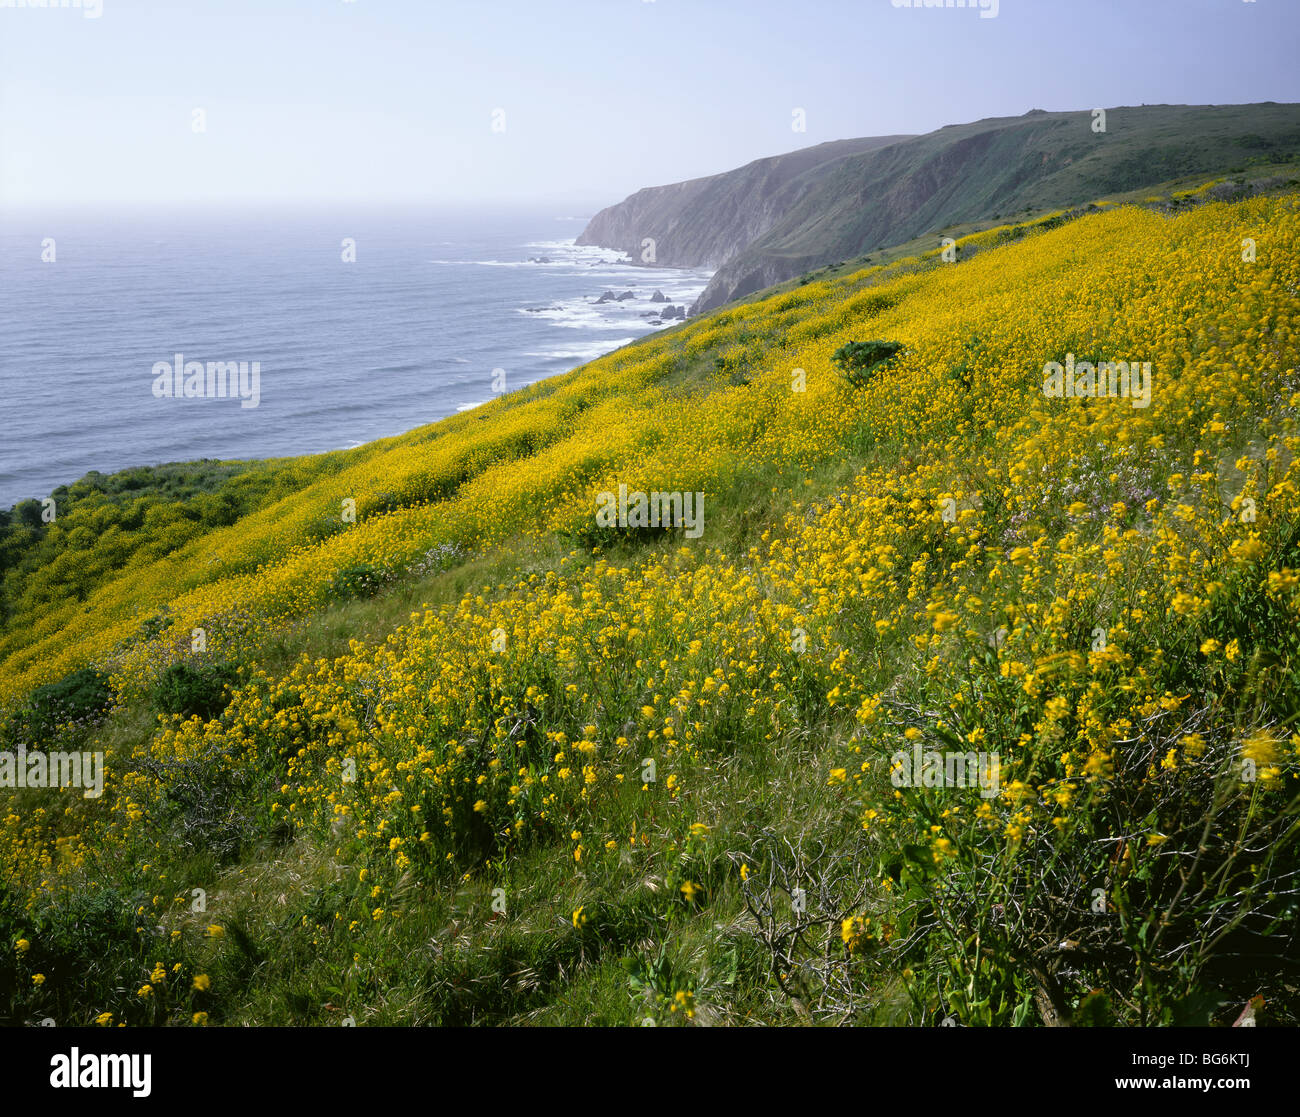 CALIFORNIA - Wildflowers blooming along the steep hillsides on Tomales Point in Point Reyes National Seashore. Stock Photo